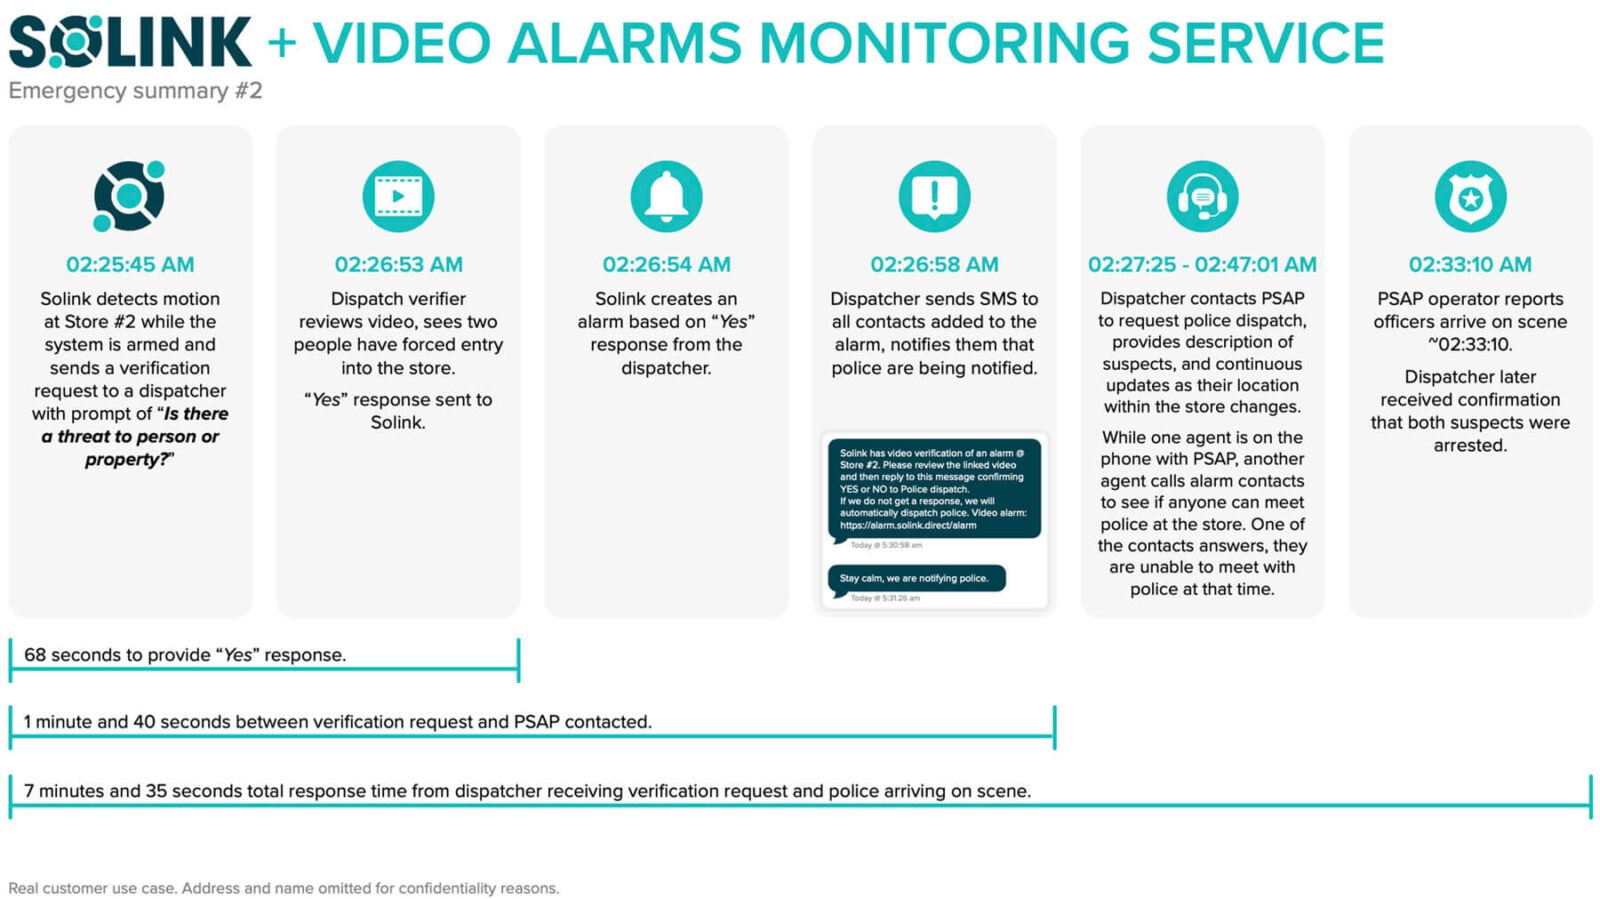 remote video monitoring timeline for Solink and Noonlight